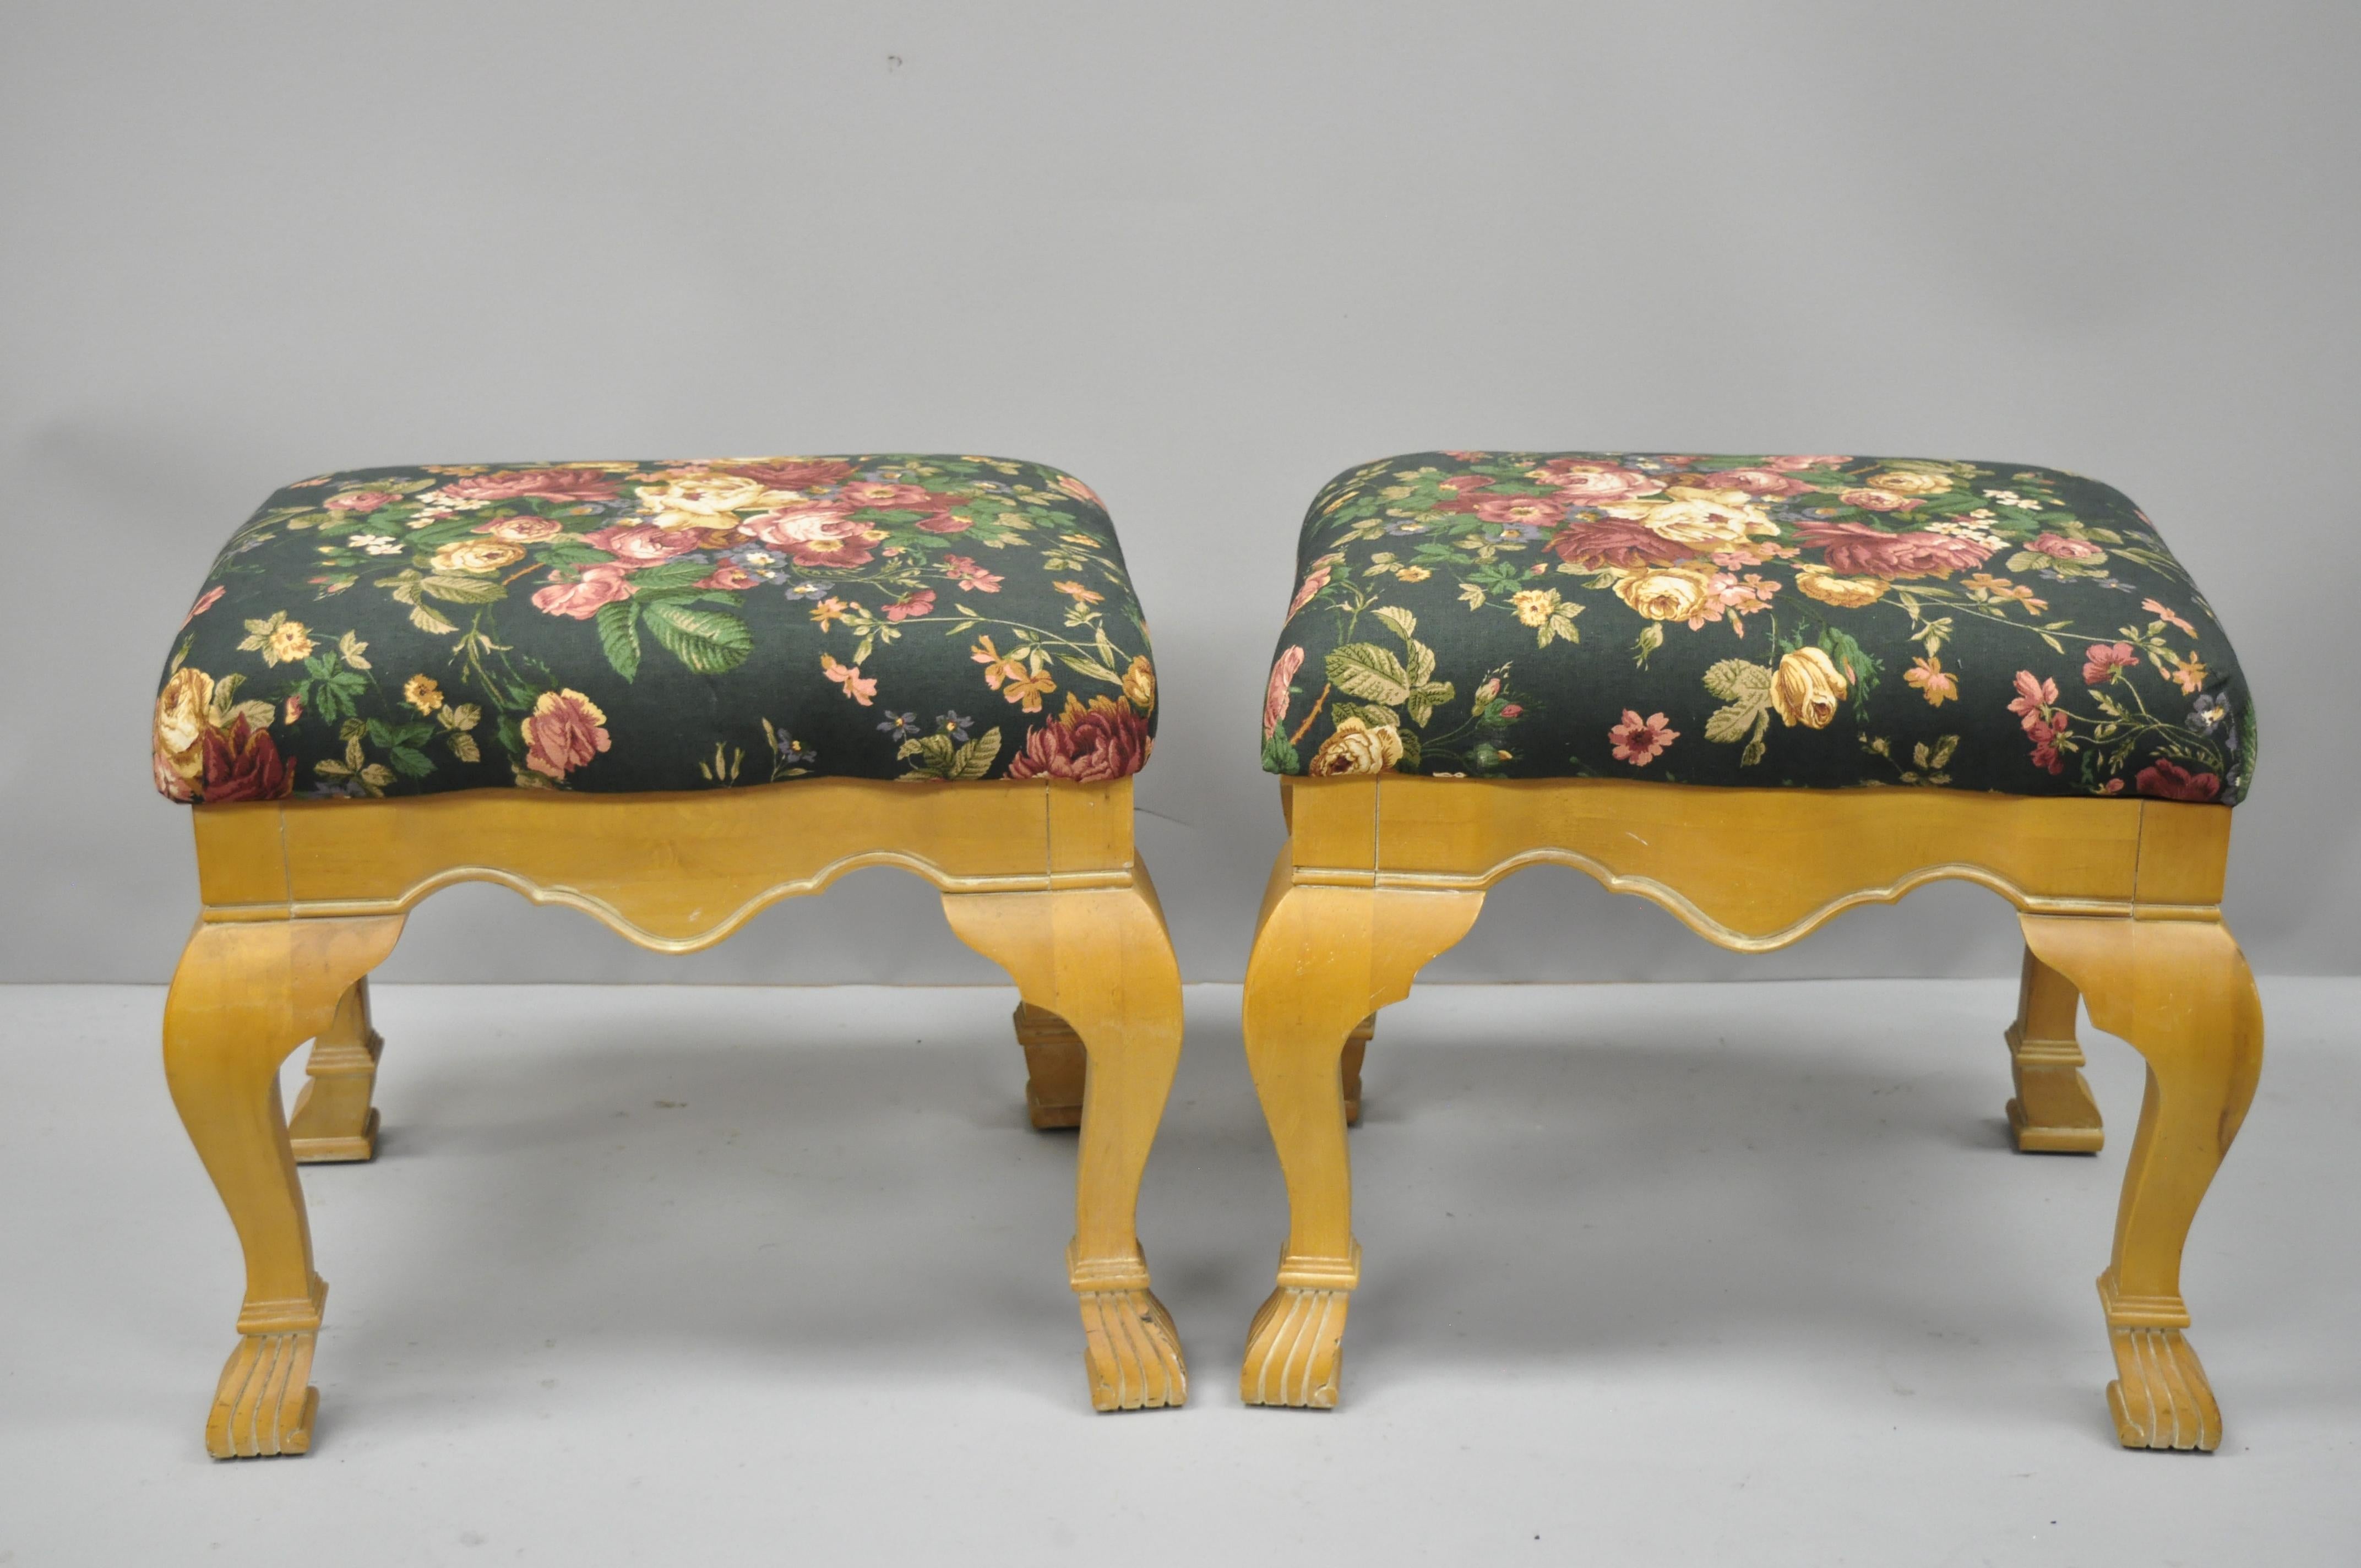 Pair of Country French style cabriole leg hoof foot upholstered stools. Items feature solid wood construction, beautiful wood grain, floral upholstered seats, distressed finish, cabriole legs, great style and form, circa late 20th century.